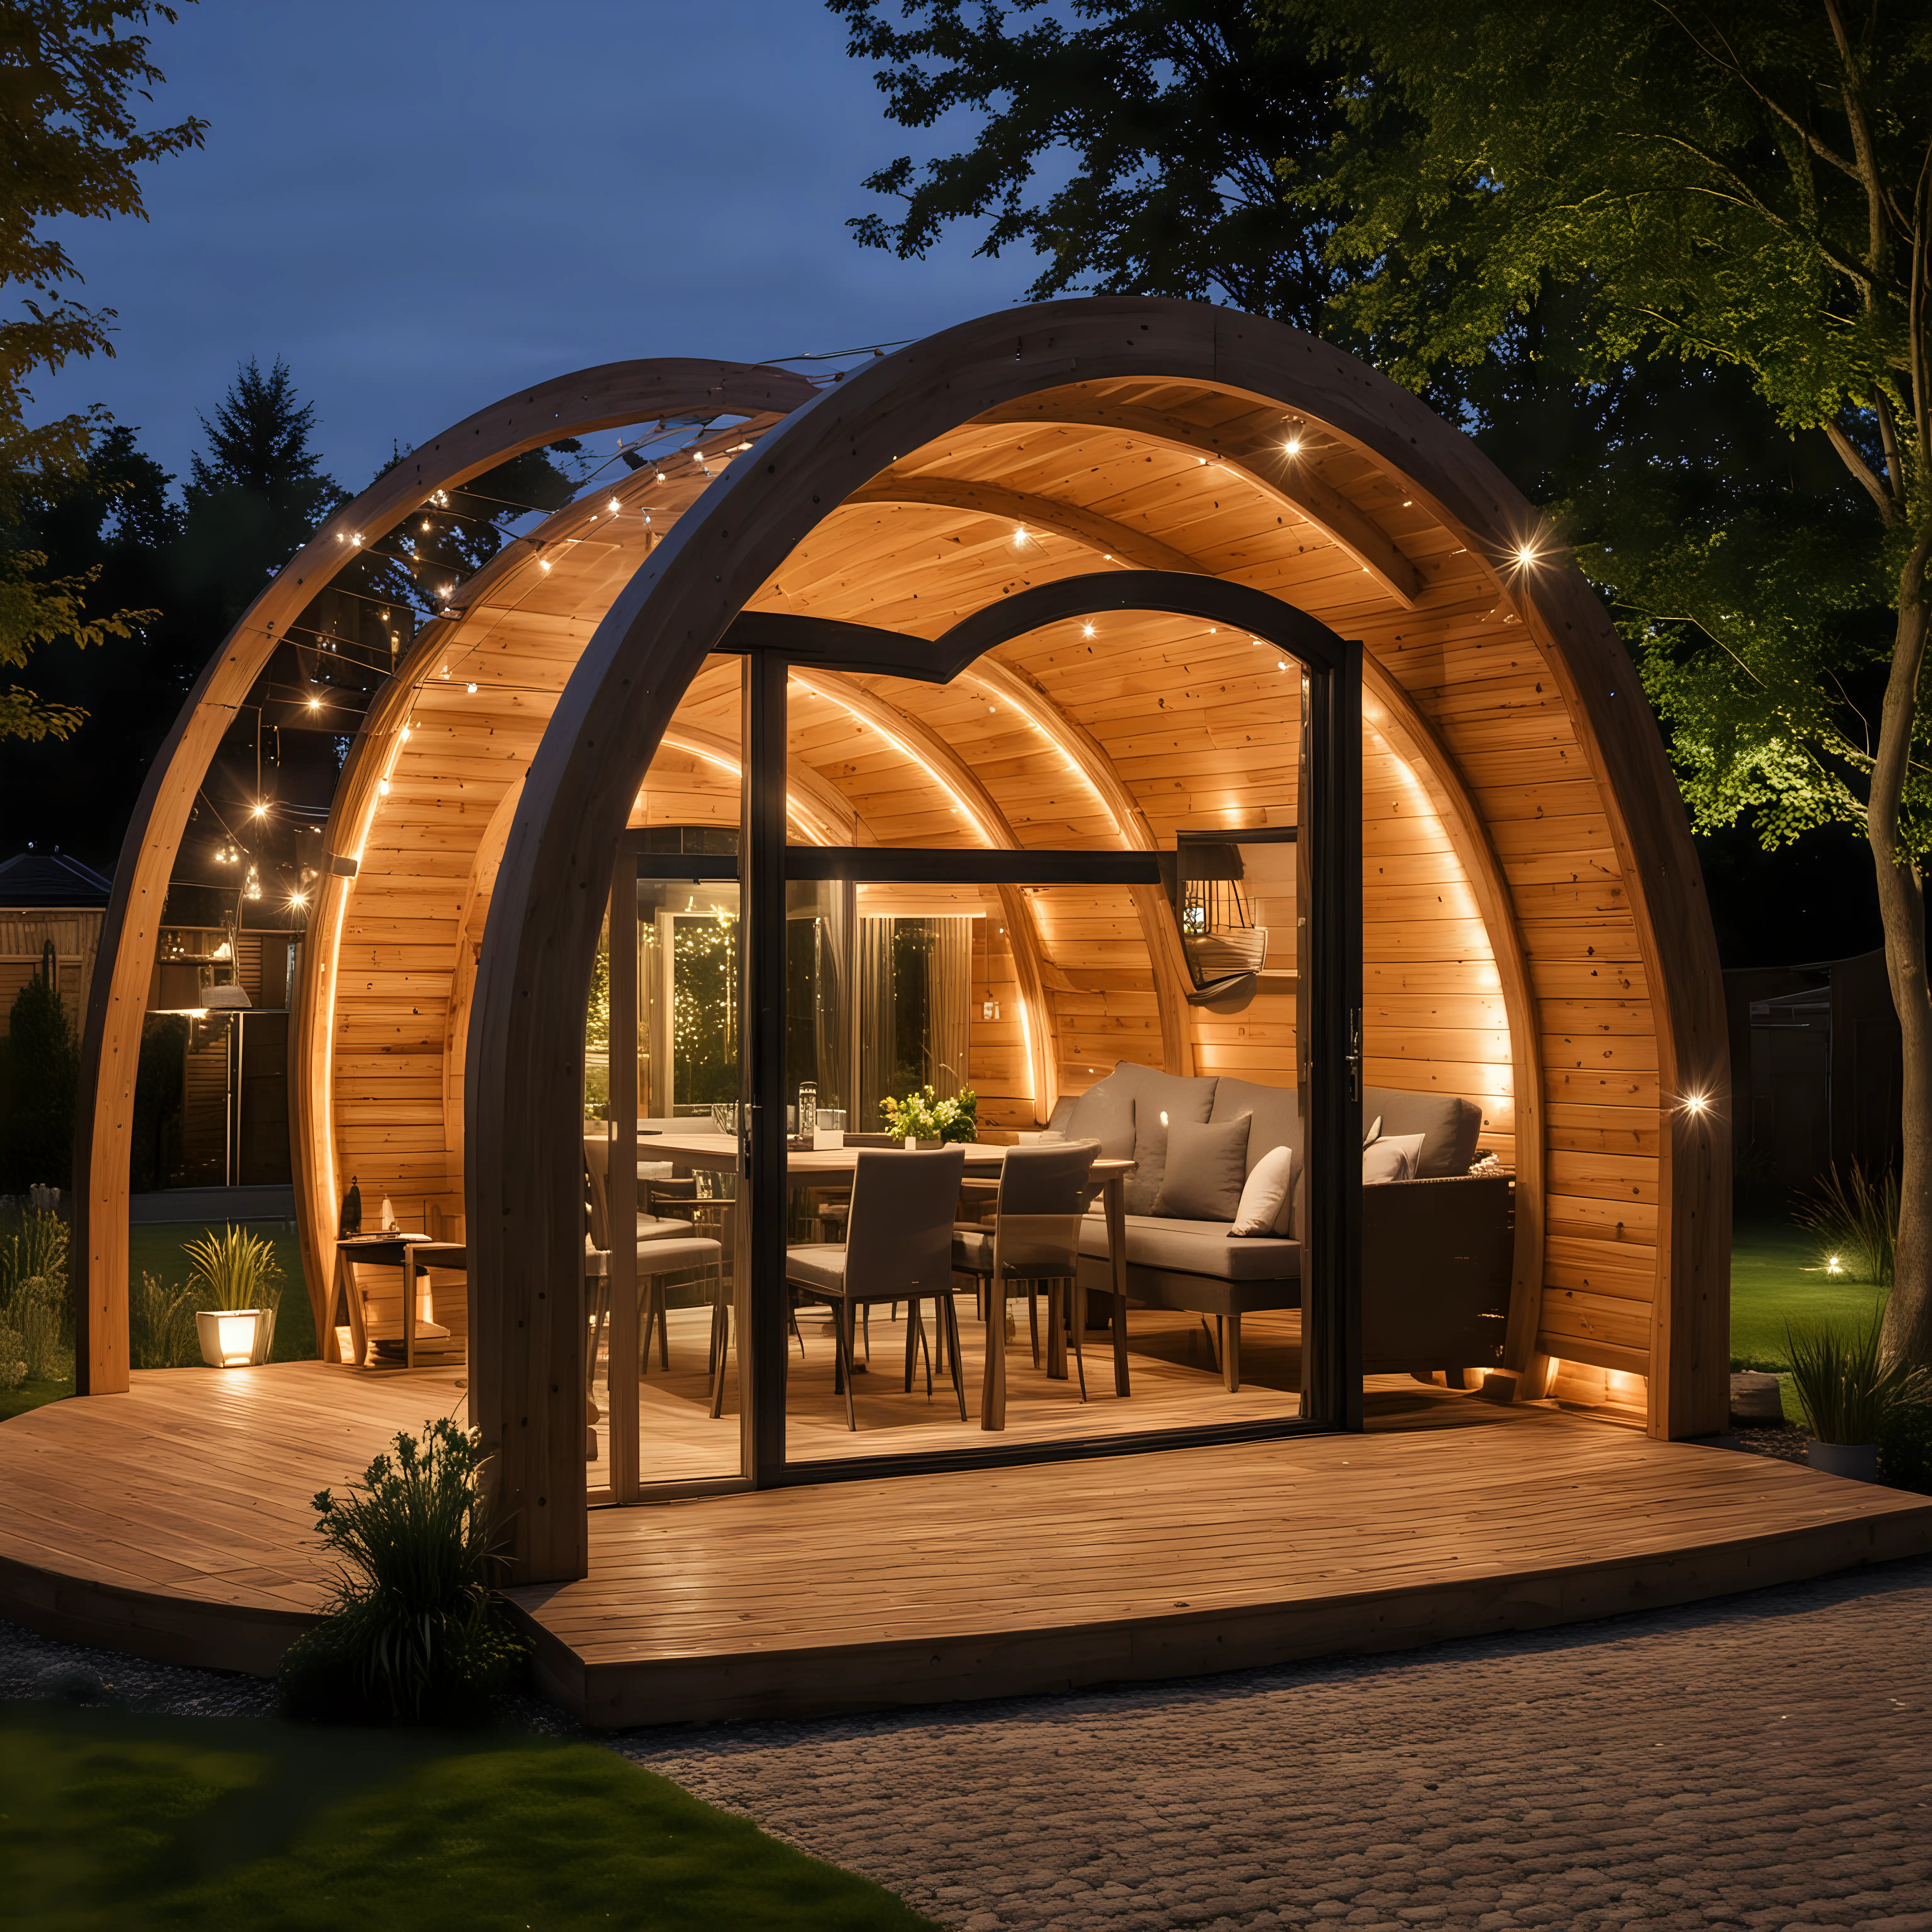 Glulam Arched Pavilion with Soft Ambient Lighting